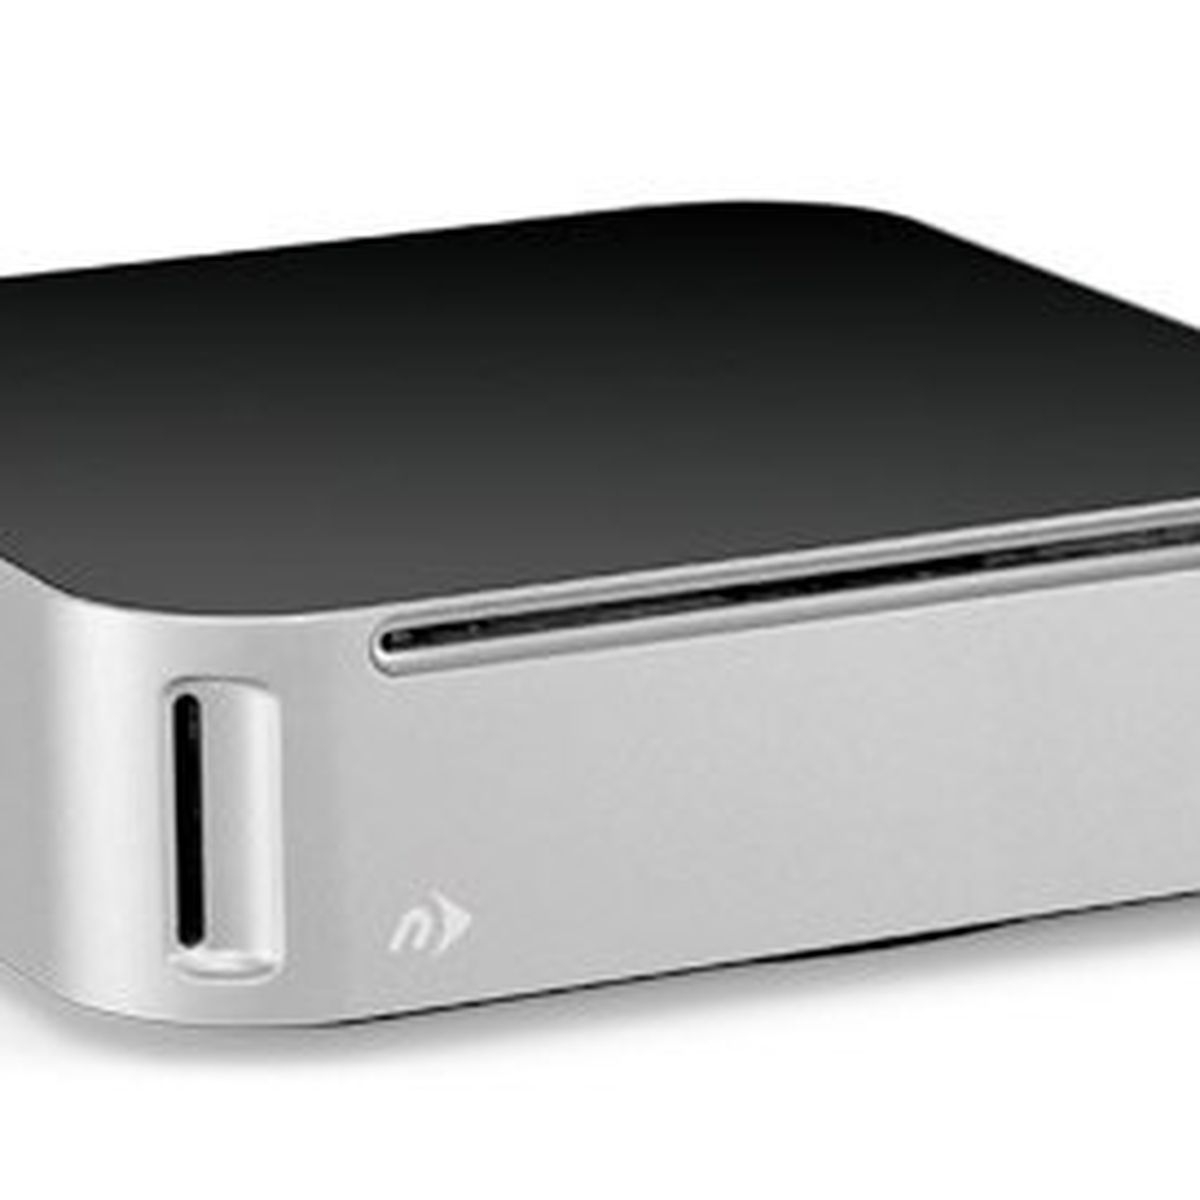 NewerTech Releases miniStack MAX Hard Drive/Blu-Ray Burner/SD Card